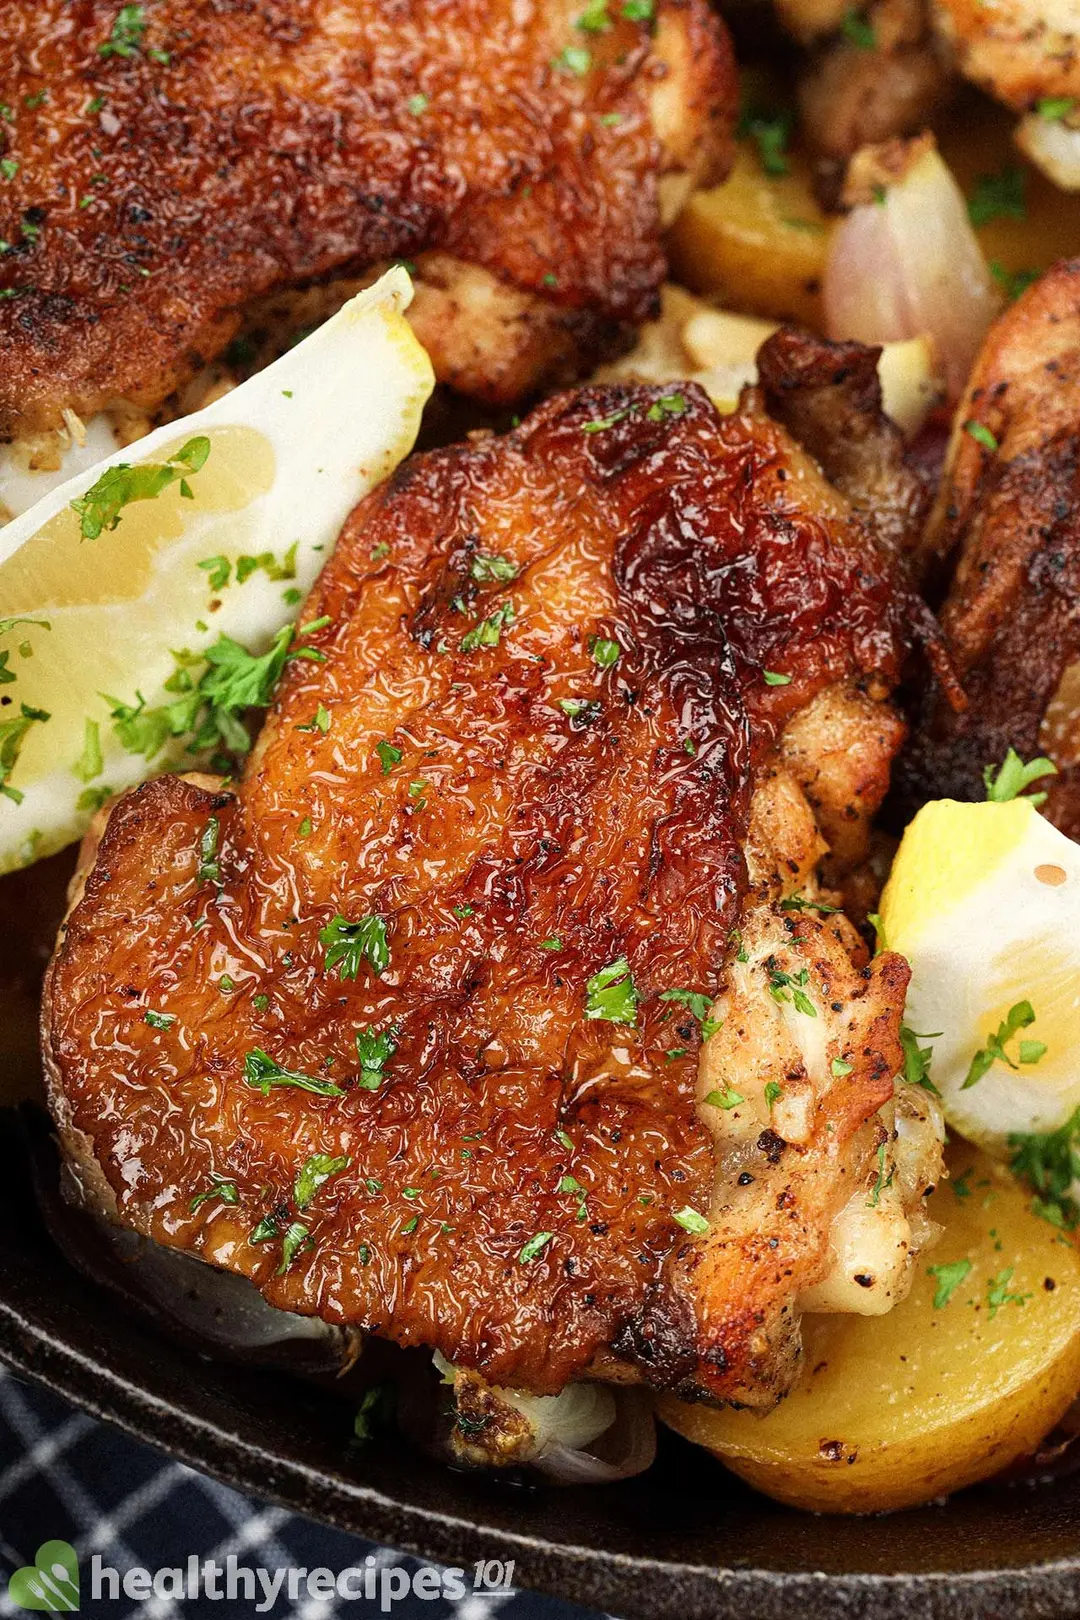 A close-up shot of cooked chicken thighs with browned and glossy skin, laid near cooked baby potatoes